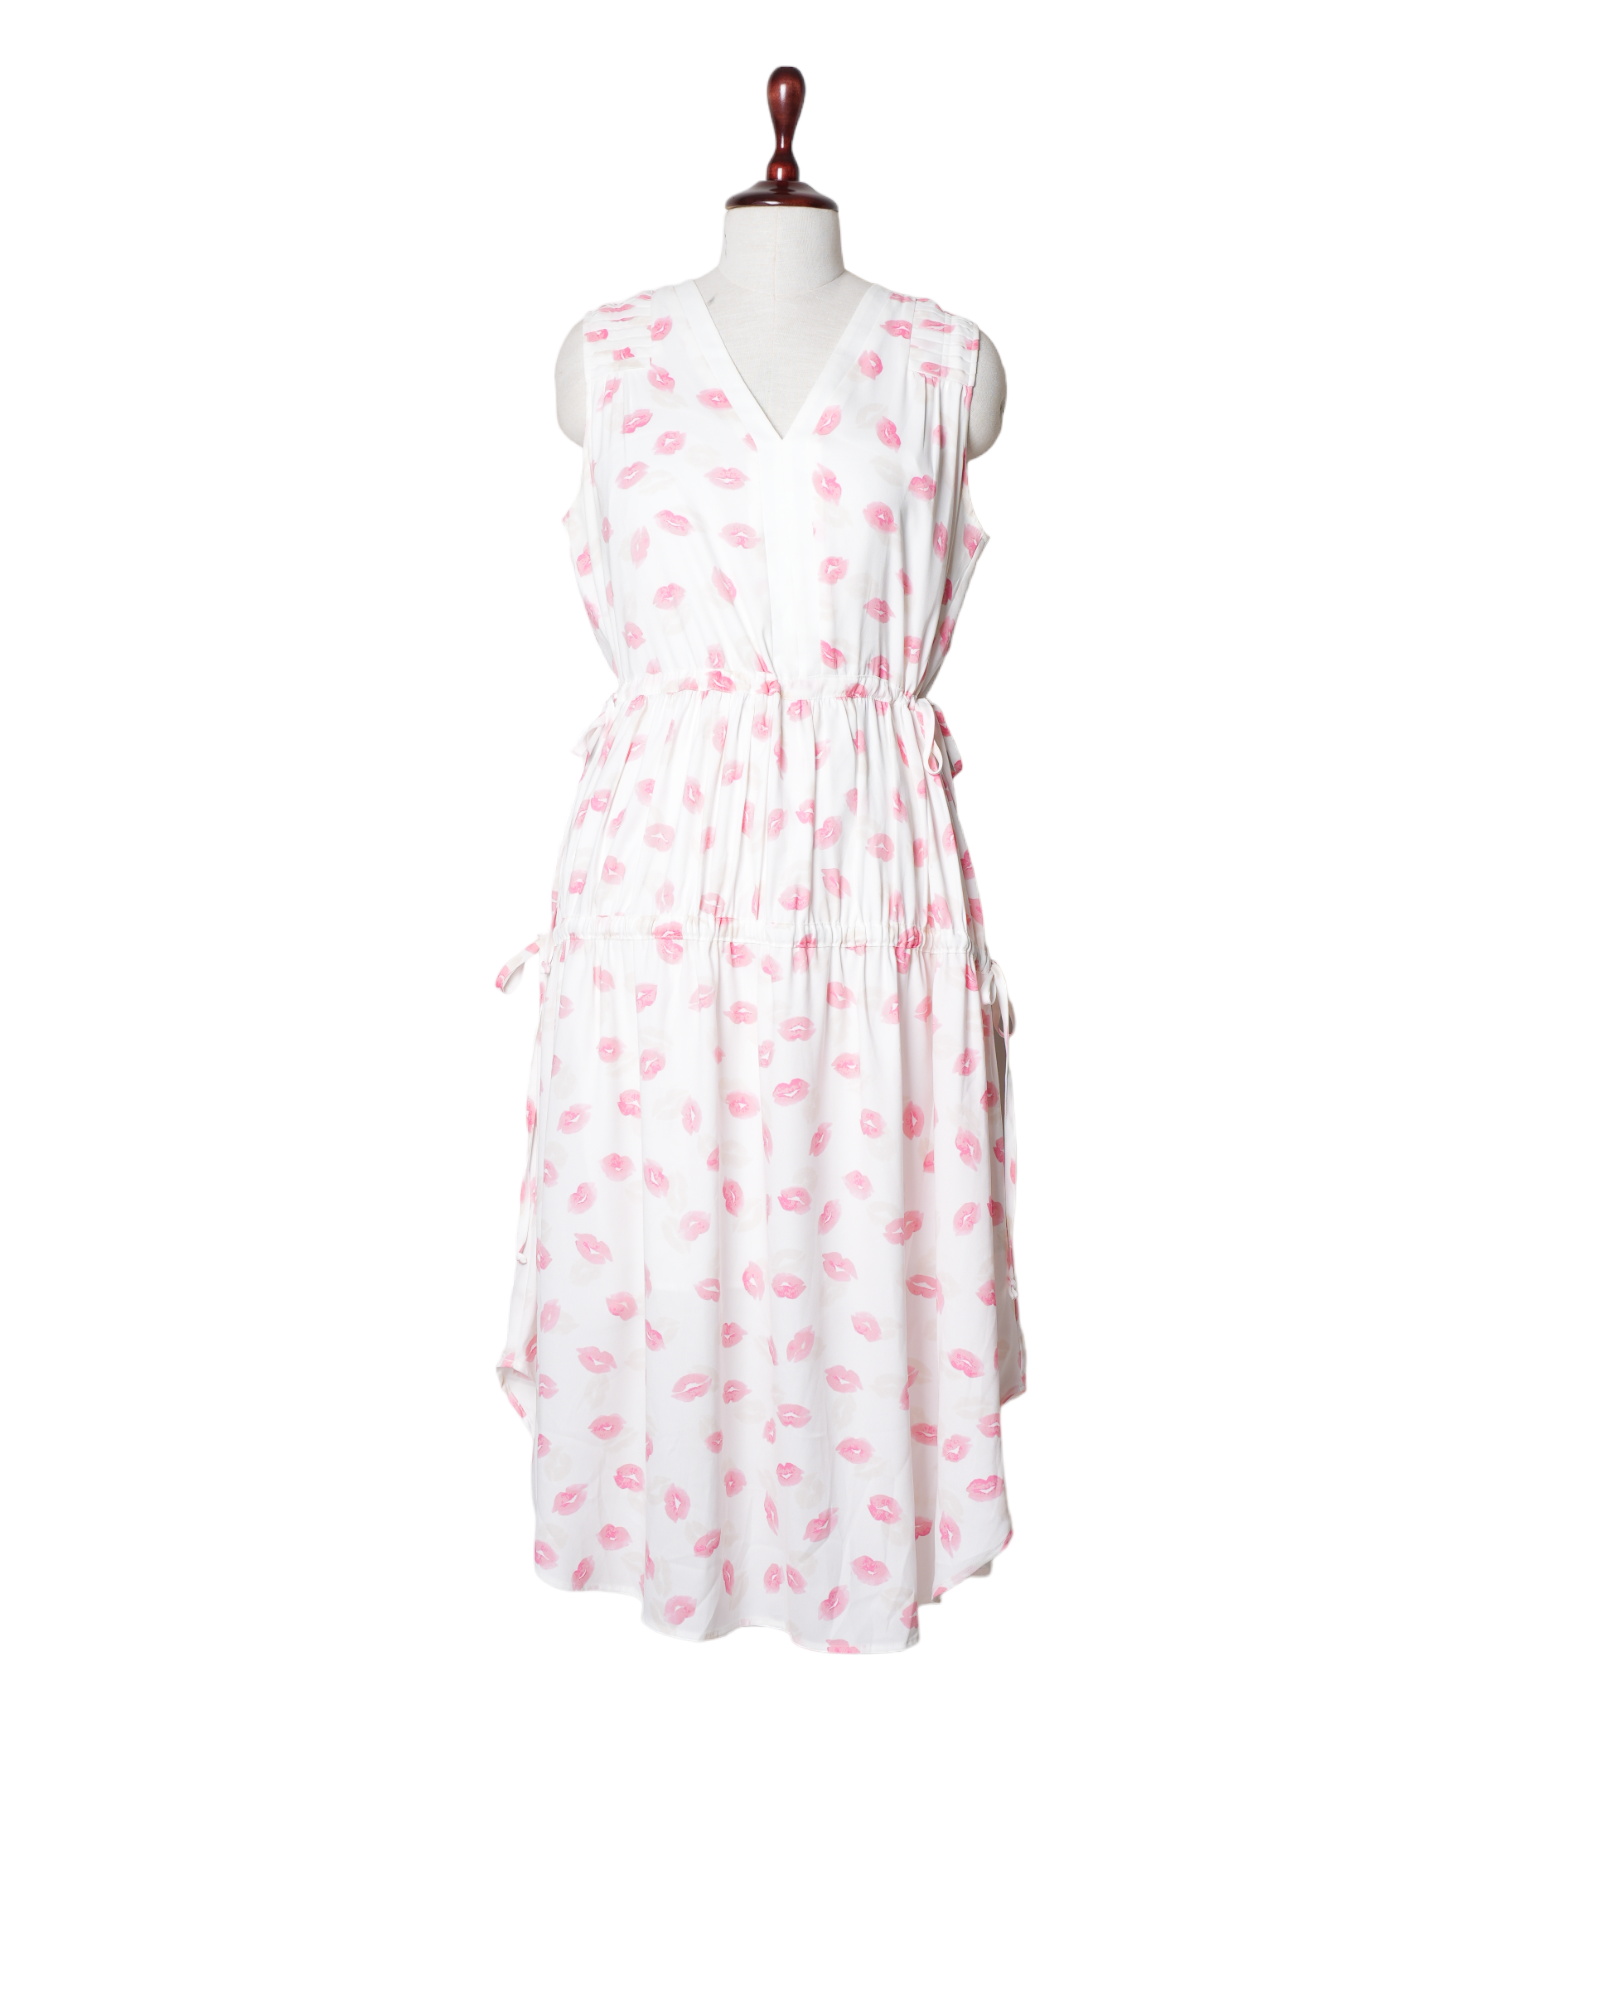 New DKNY Printed Ruched Dress